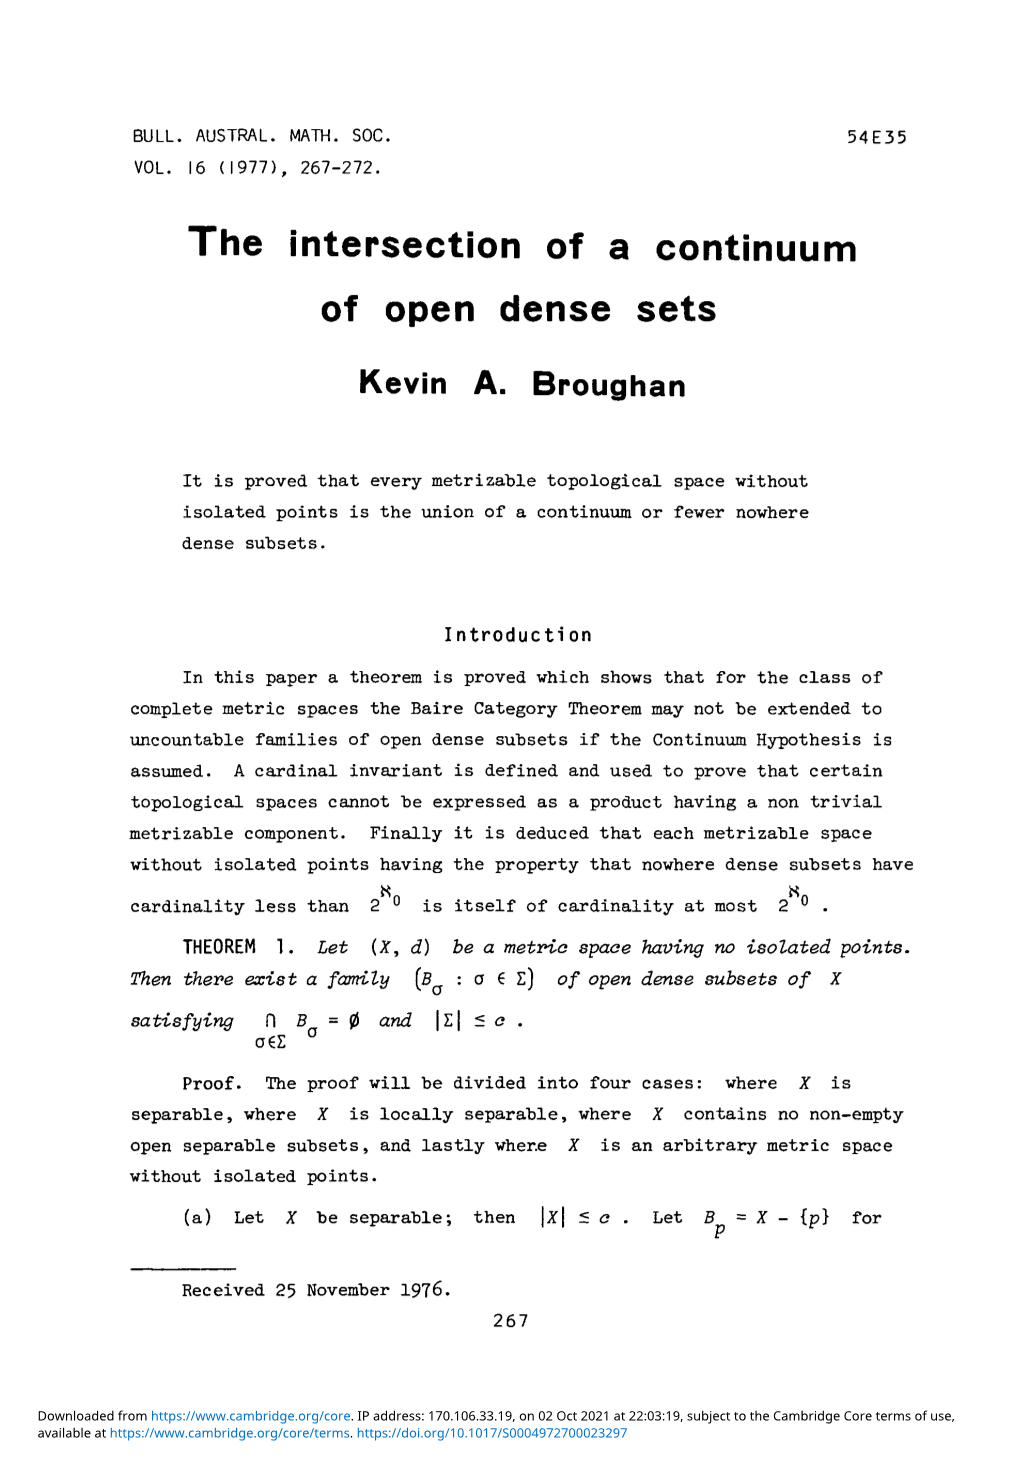 The Intersection of a Continuum of Open Dense Sets